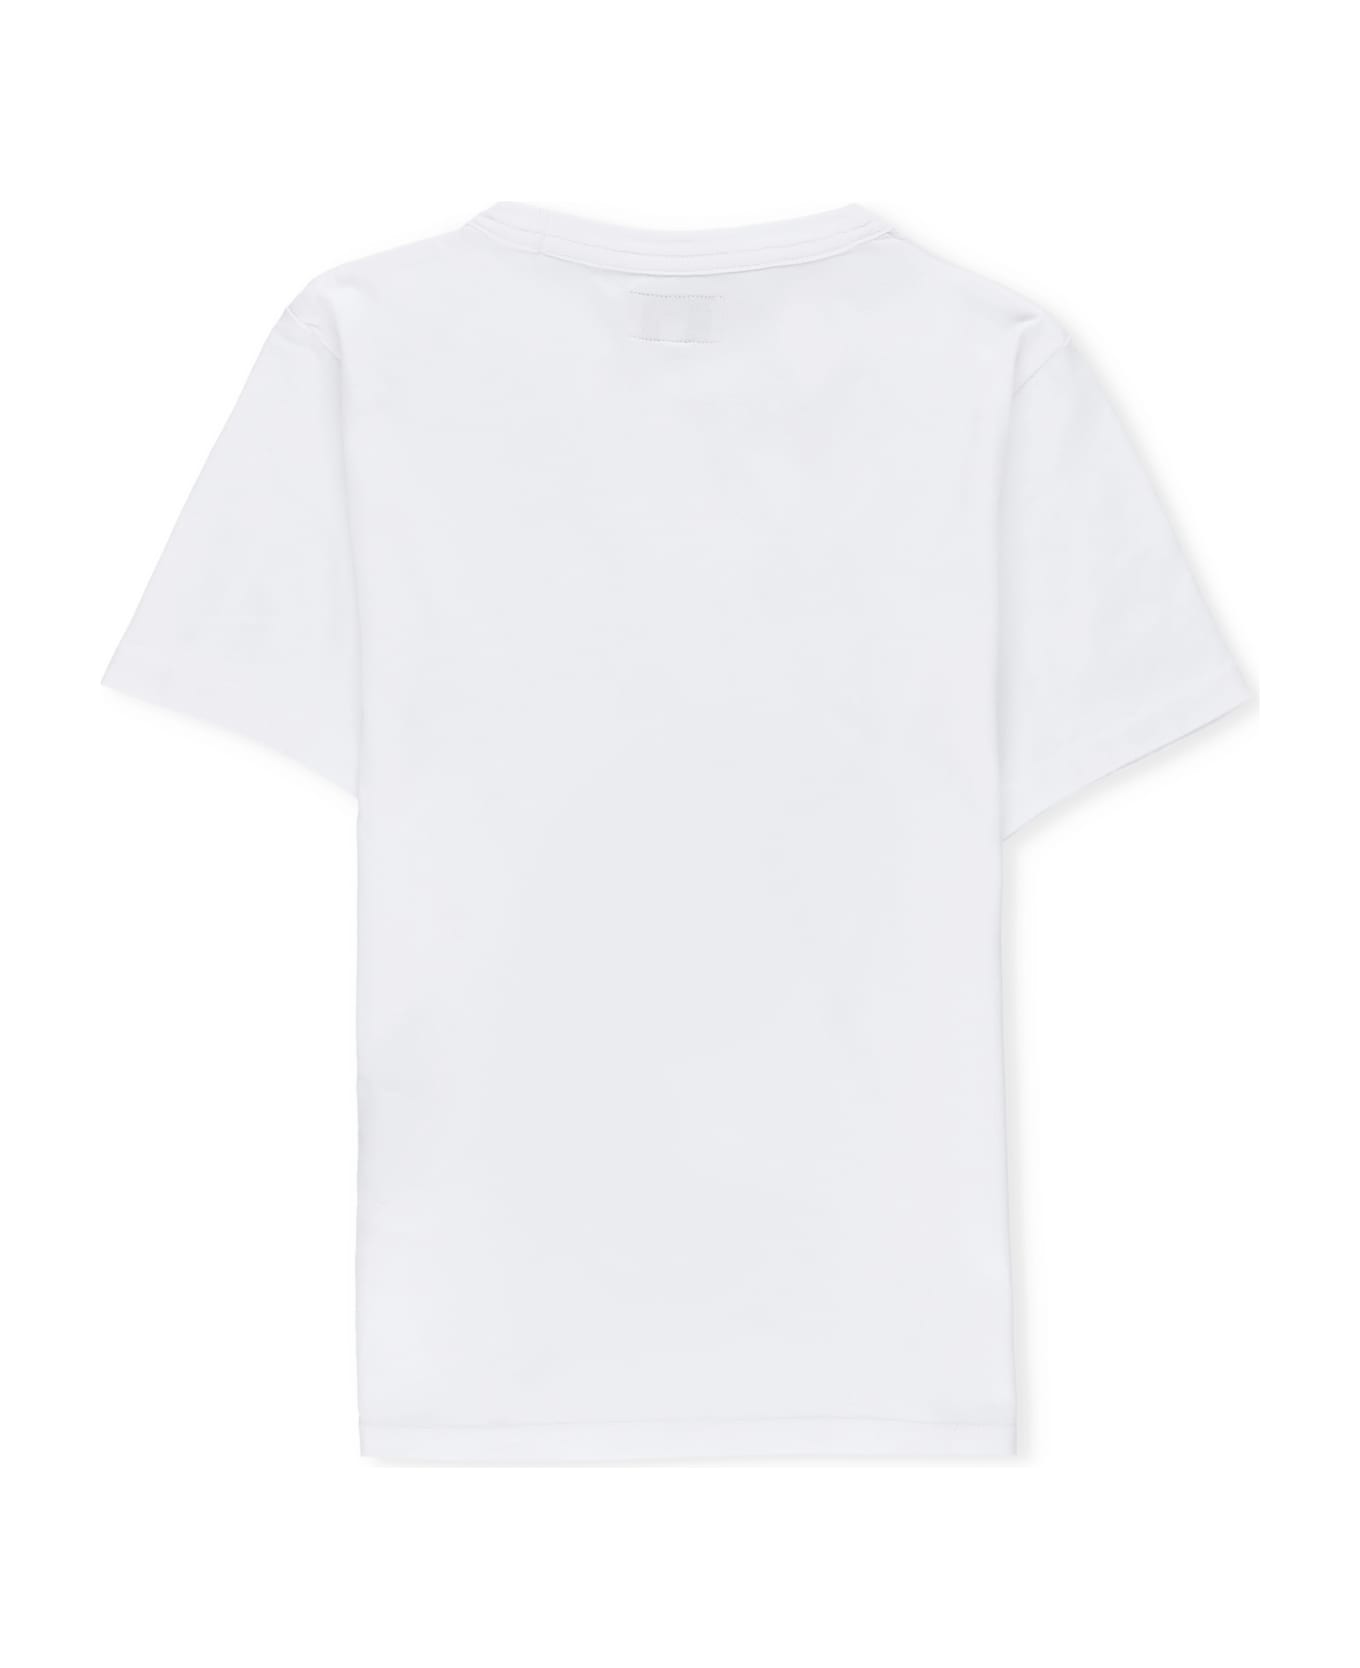 Woolrich T-shirt With Logo - White